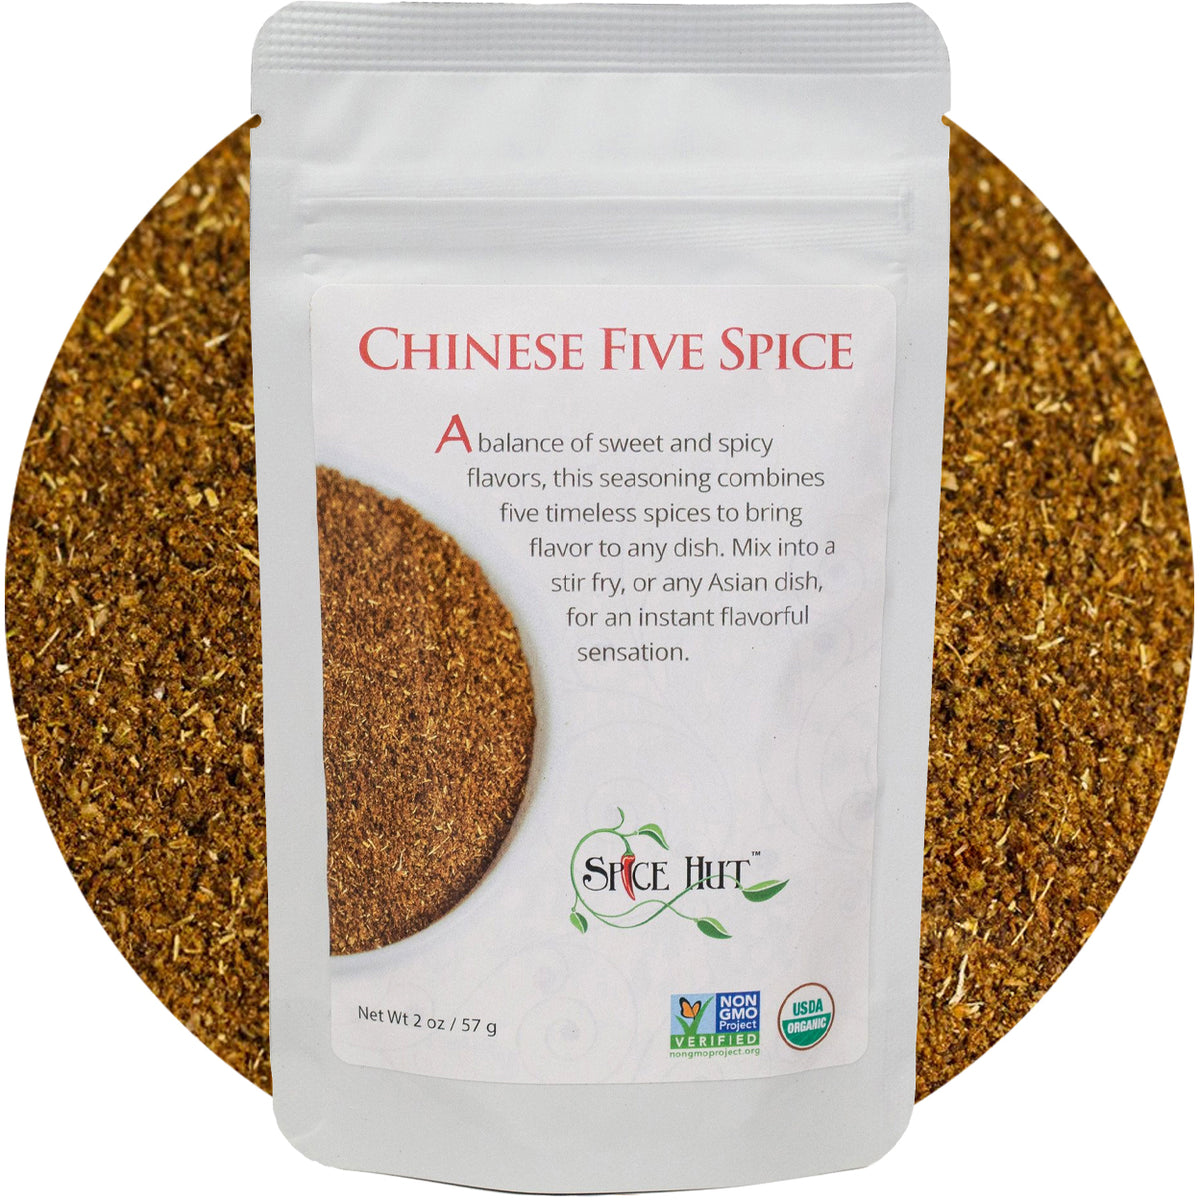 Chinese Five Spice Organic Blend Seasoning, The Spice Hut, 2.0 Ounce